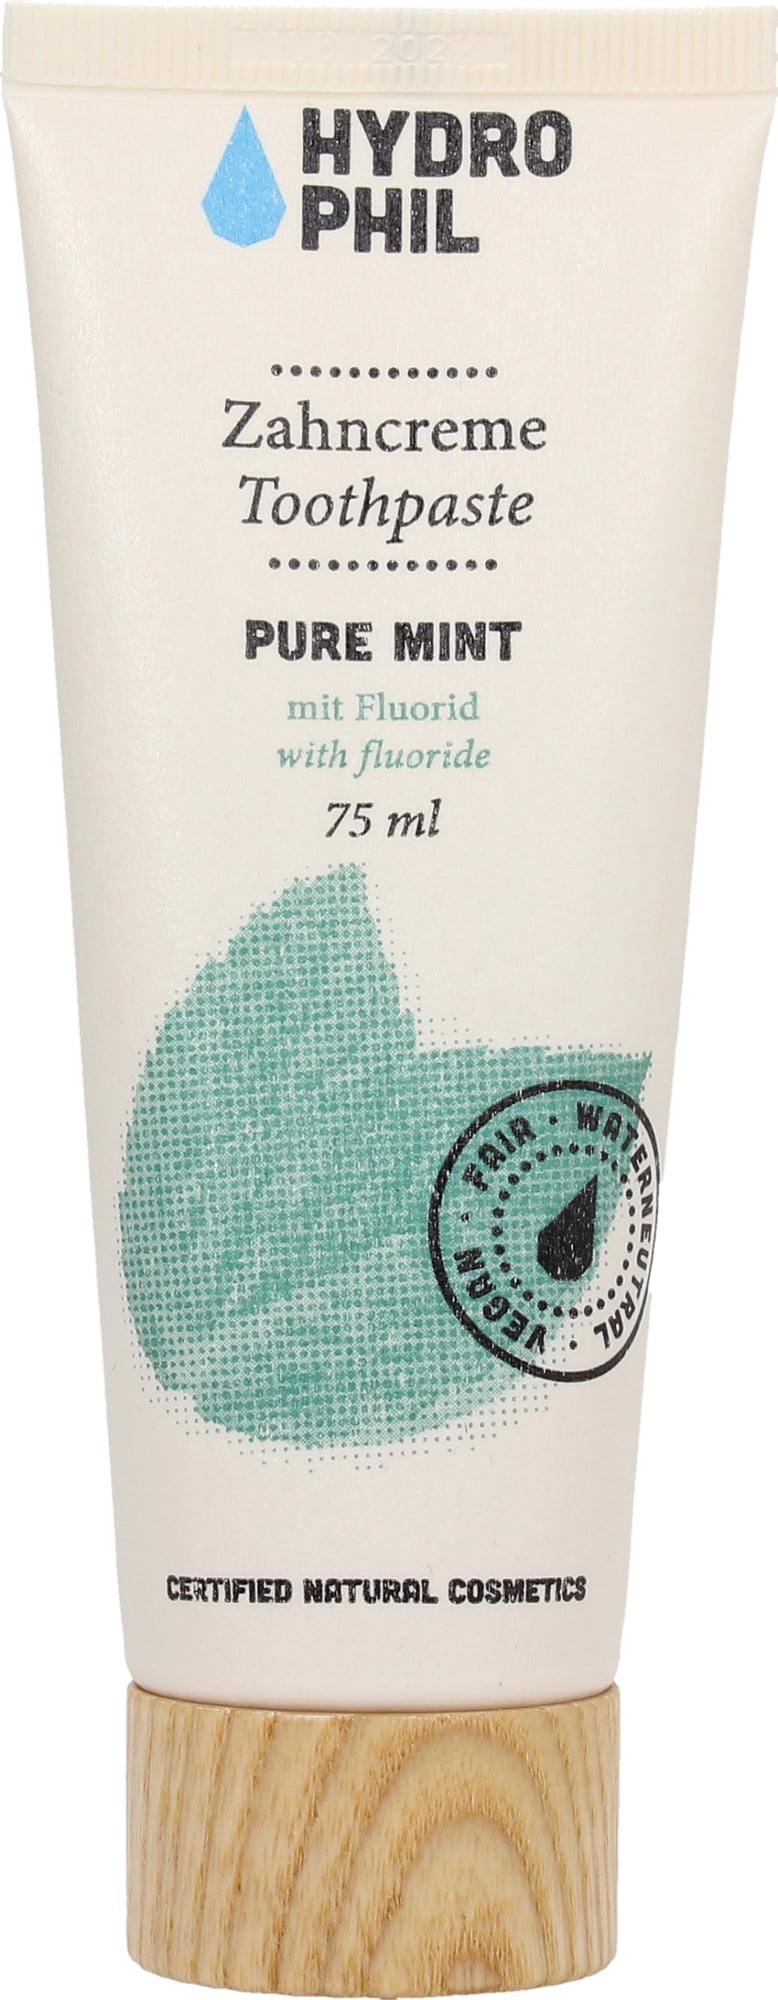 Hydrophil toothpaste pure mint, 75ml